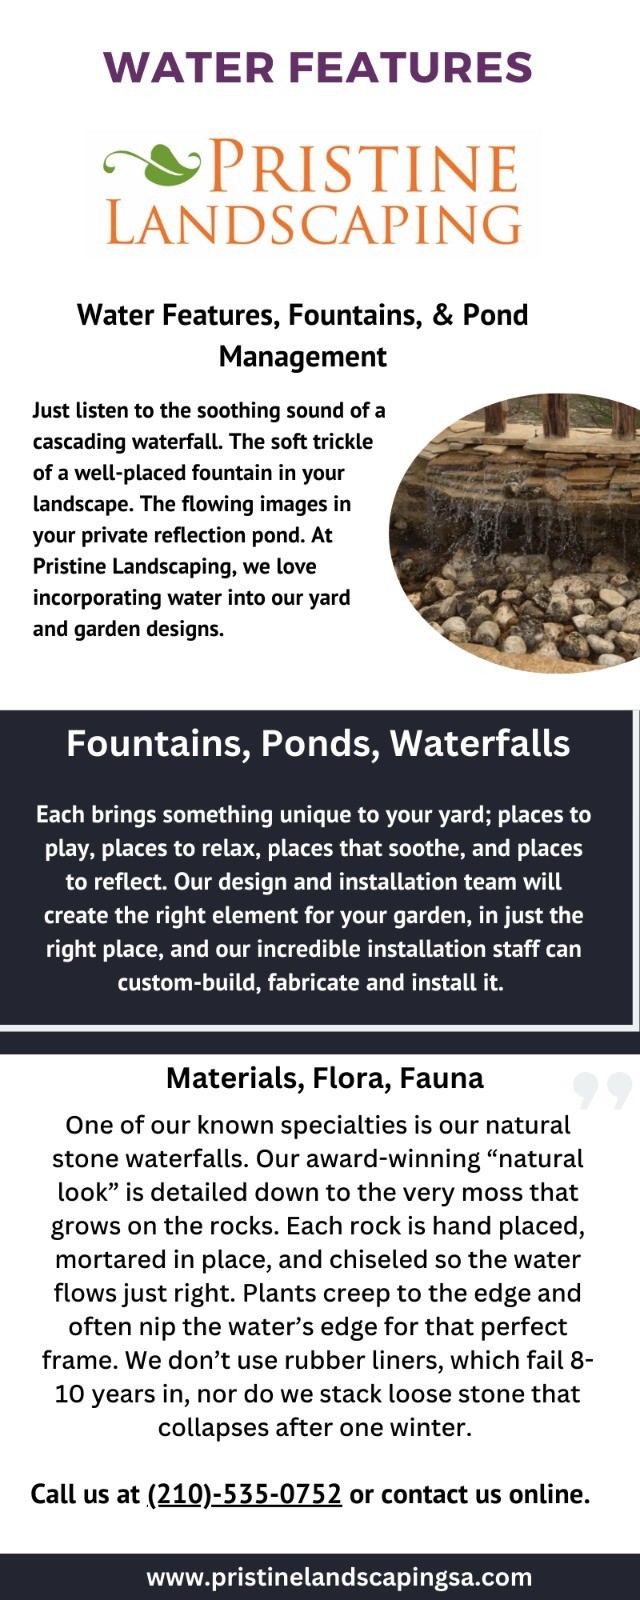 Water Features, Fountains, & Pond Management